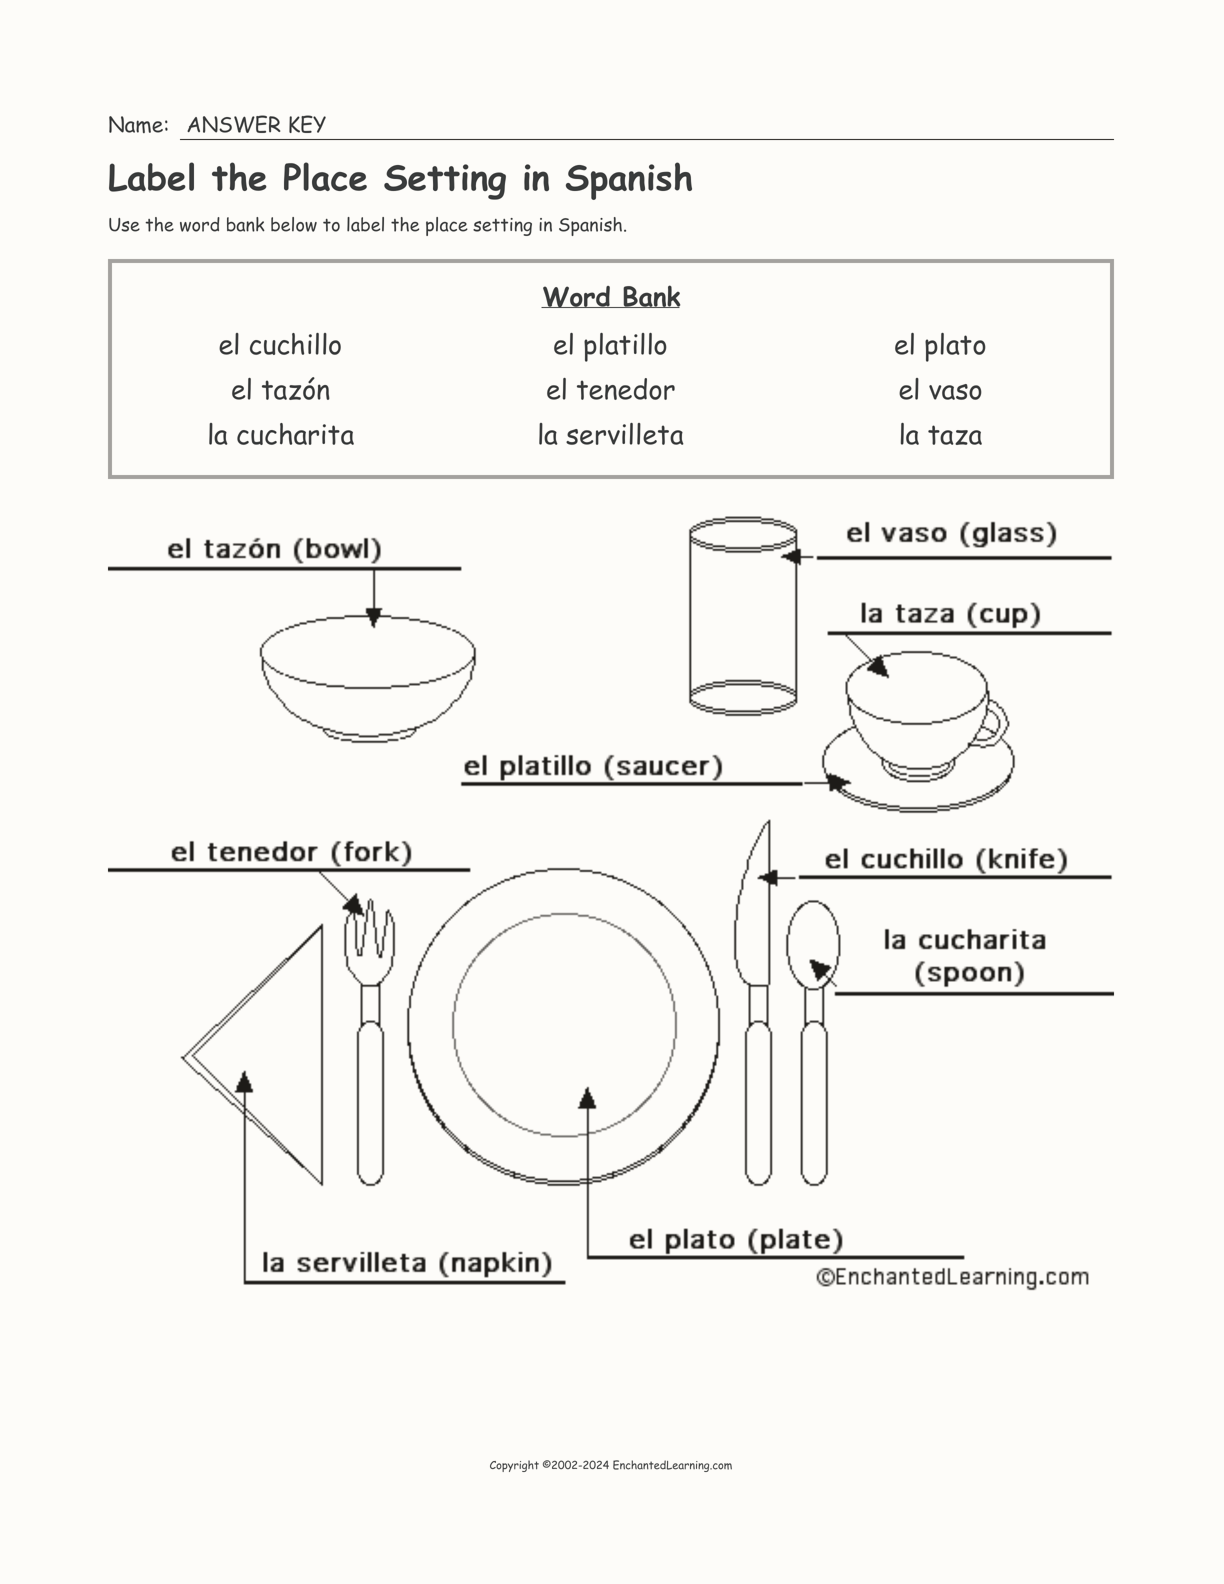 Label the Place Setting in Spanish interactive worksheet page 2